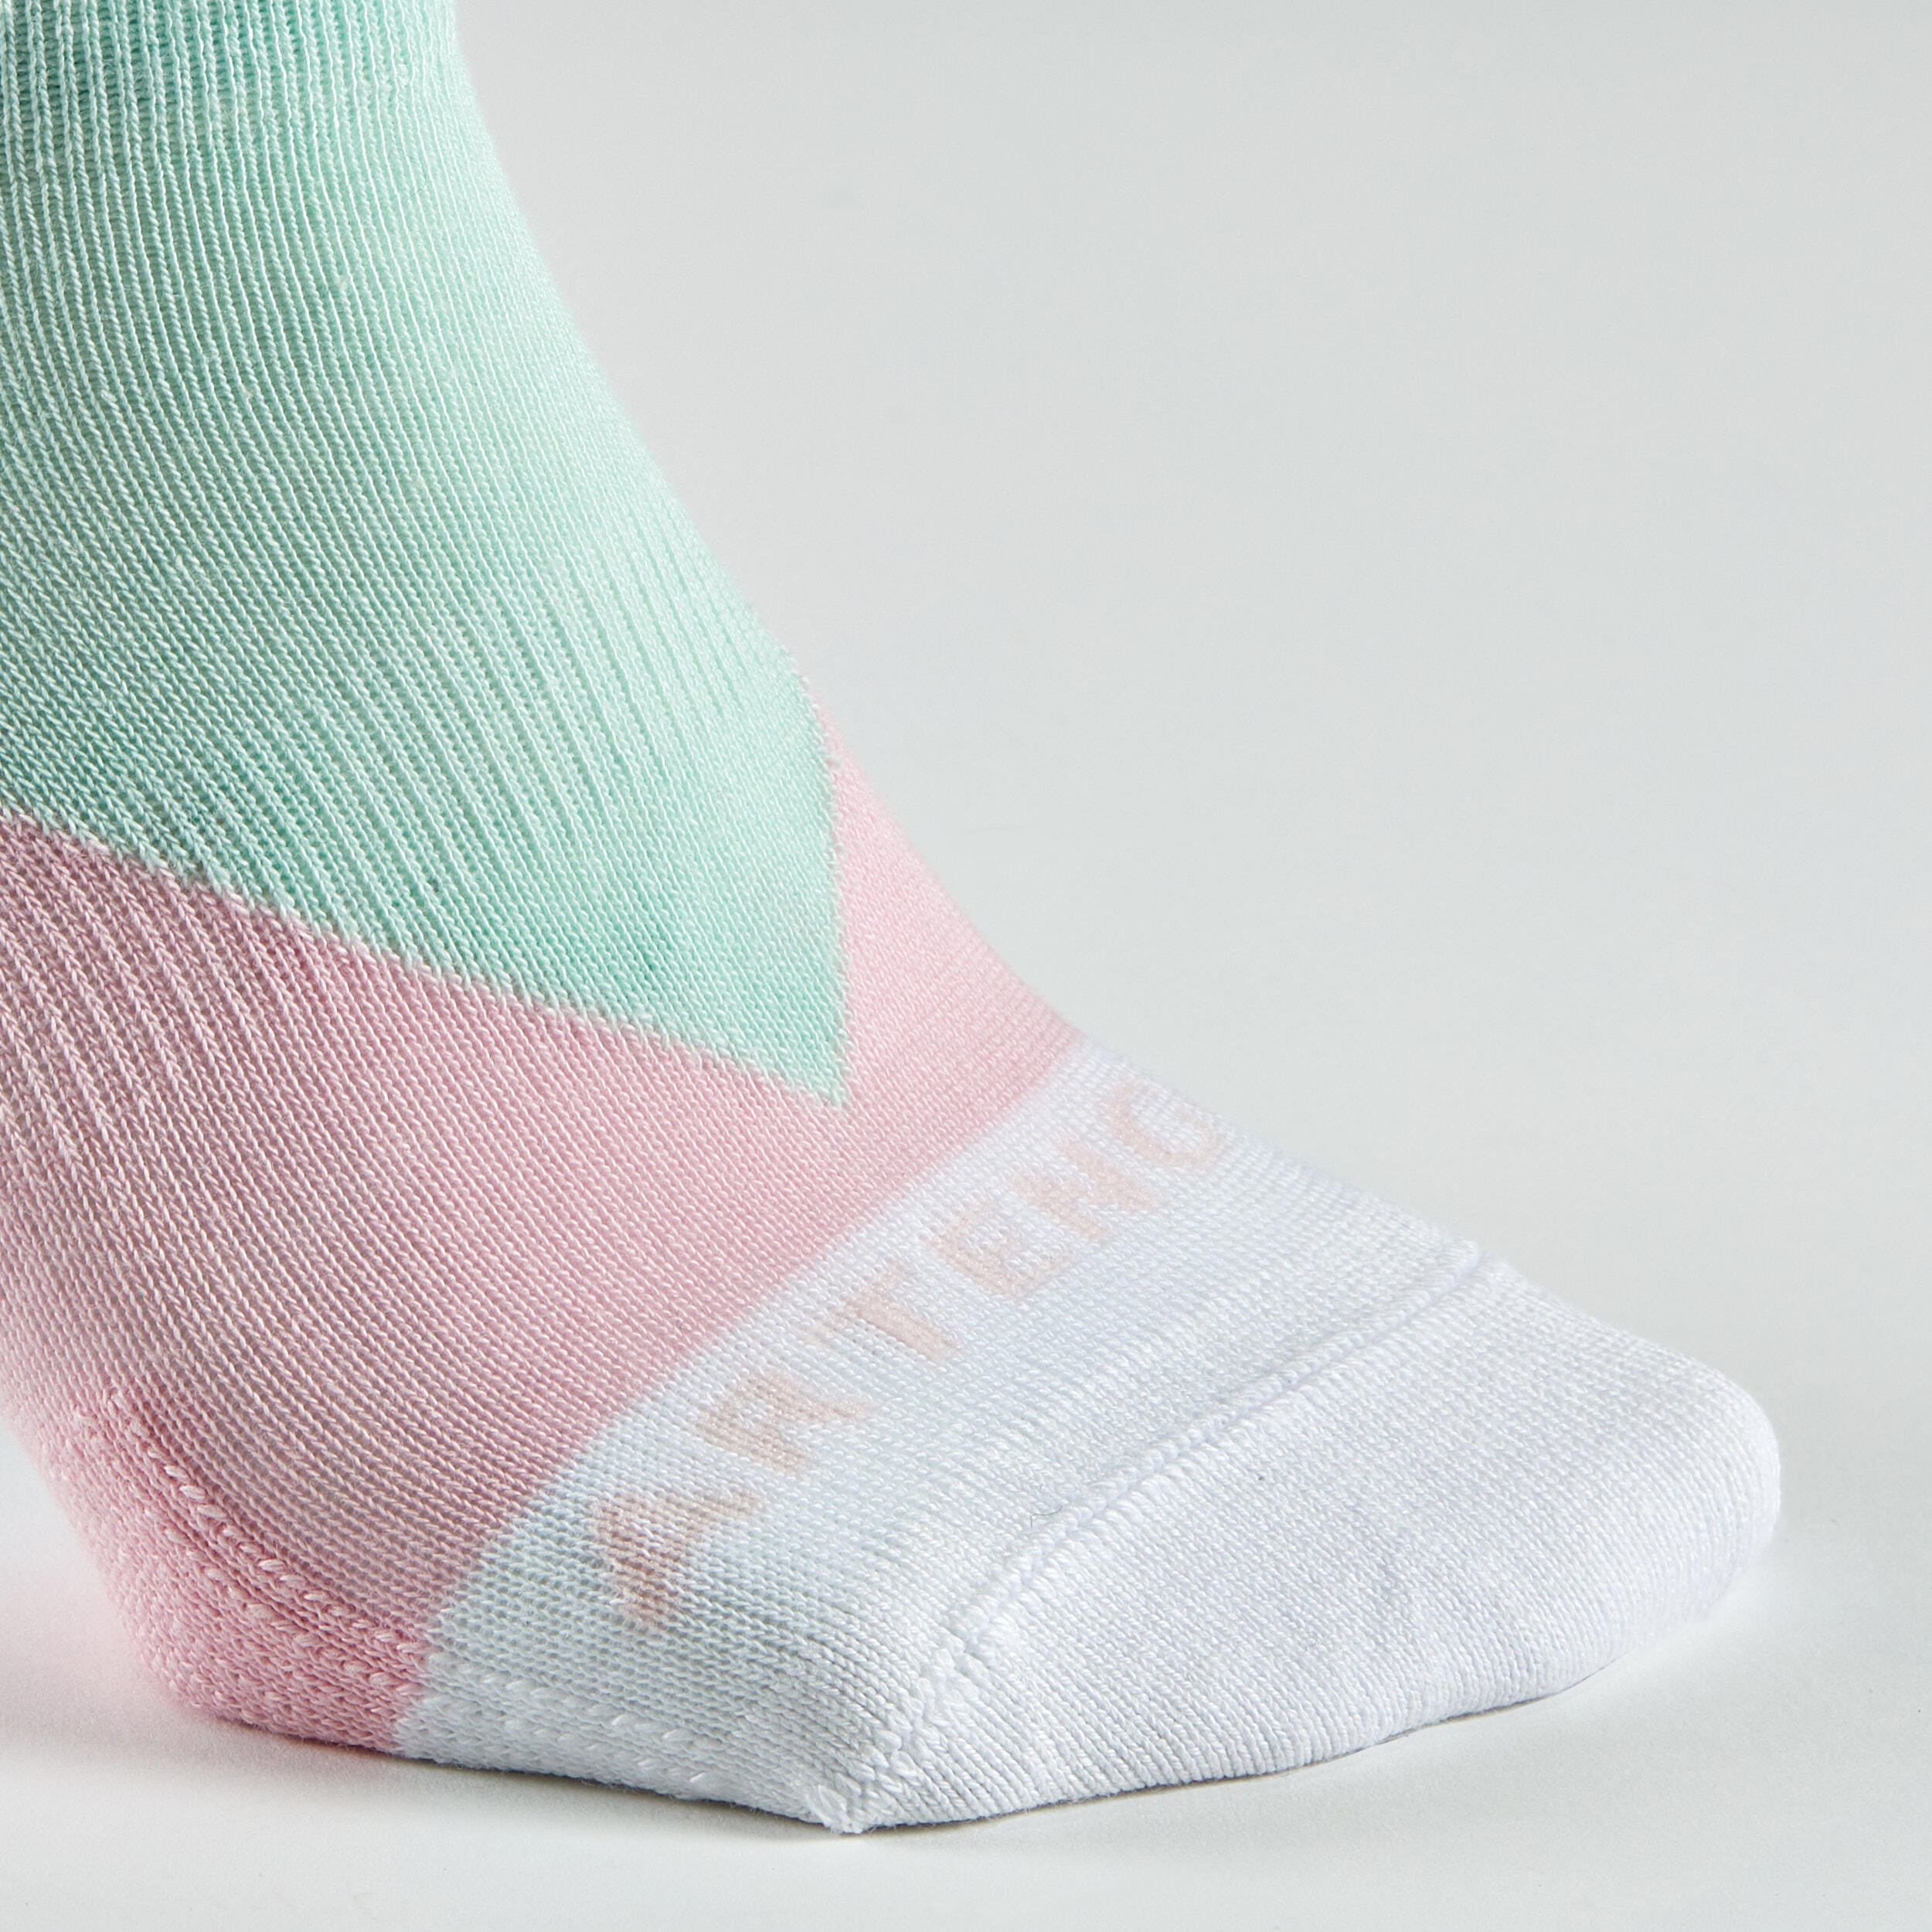 Low Sports Socks RS 160 Tri-Pack - Colour Block/Pink 6/14